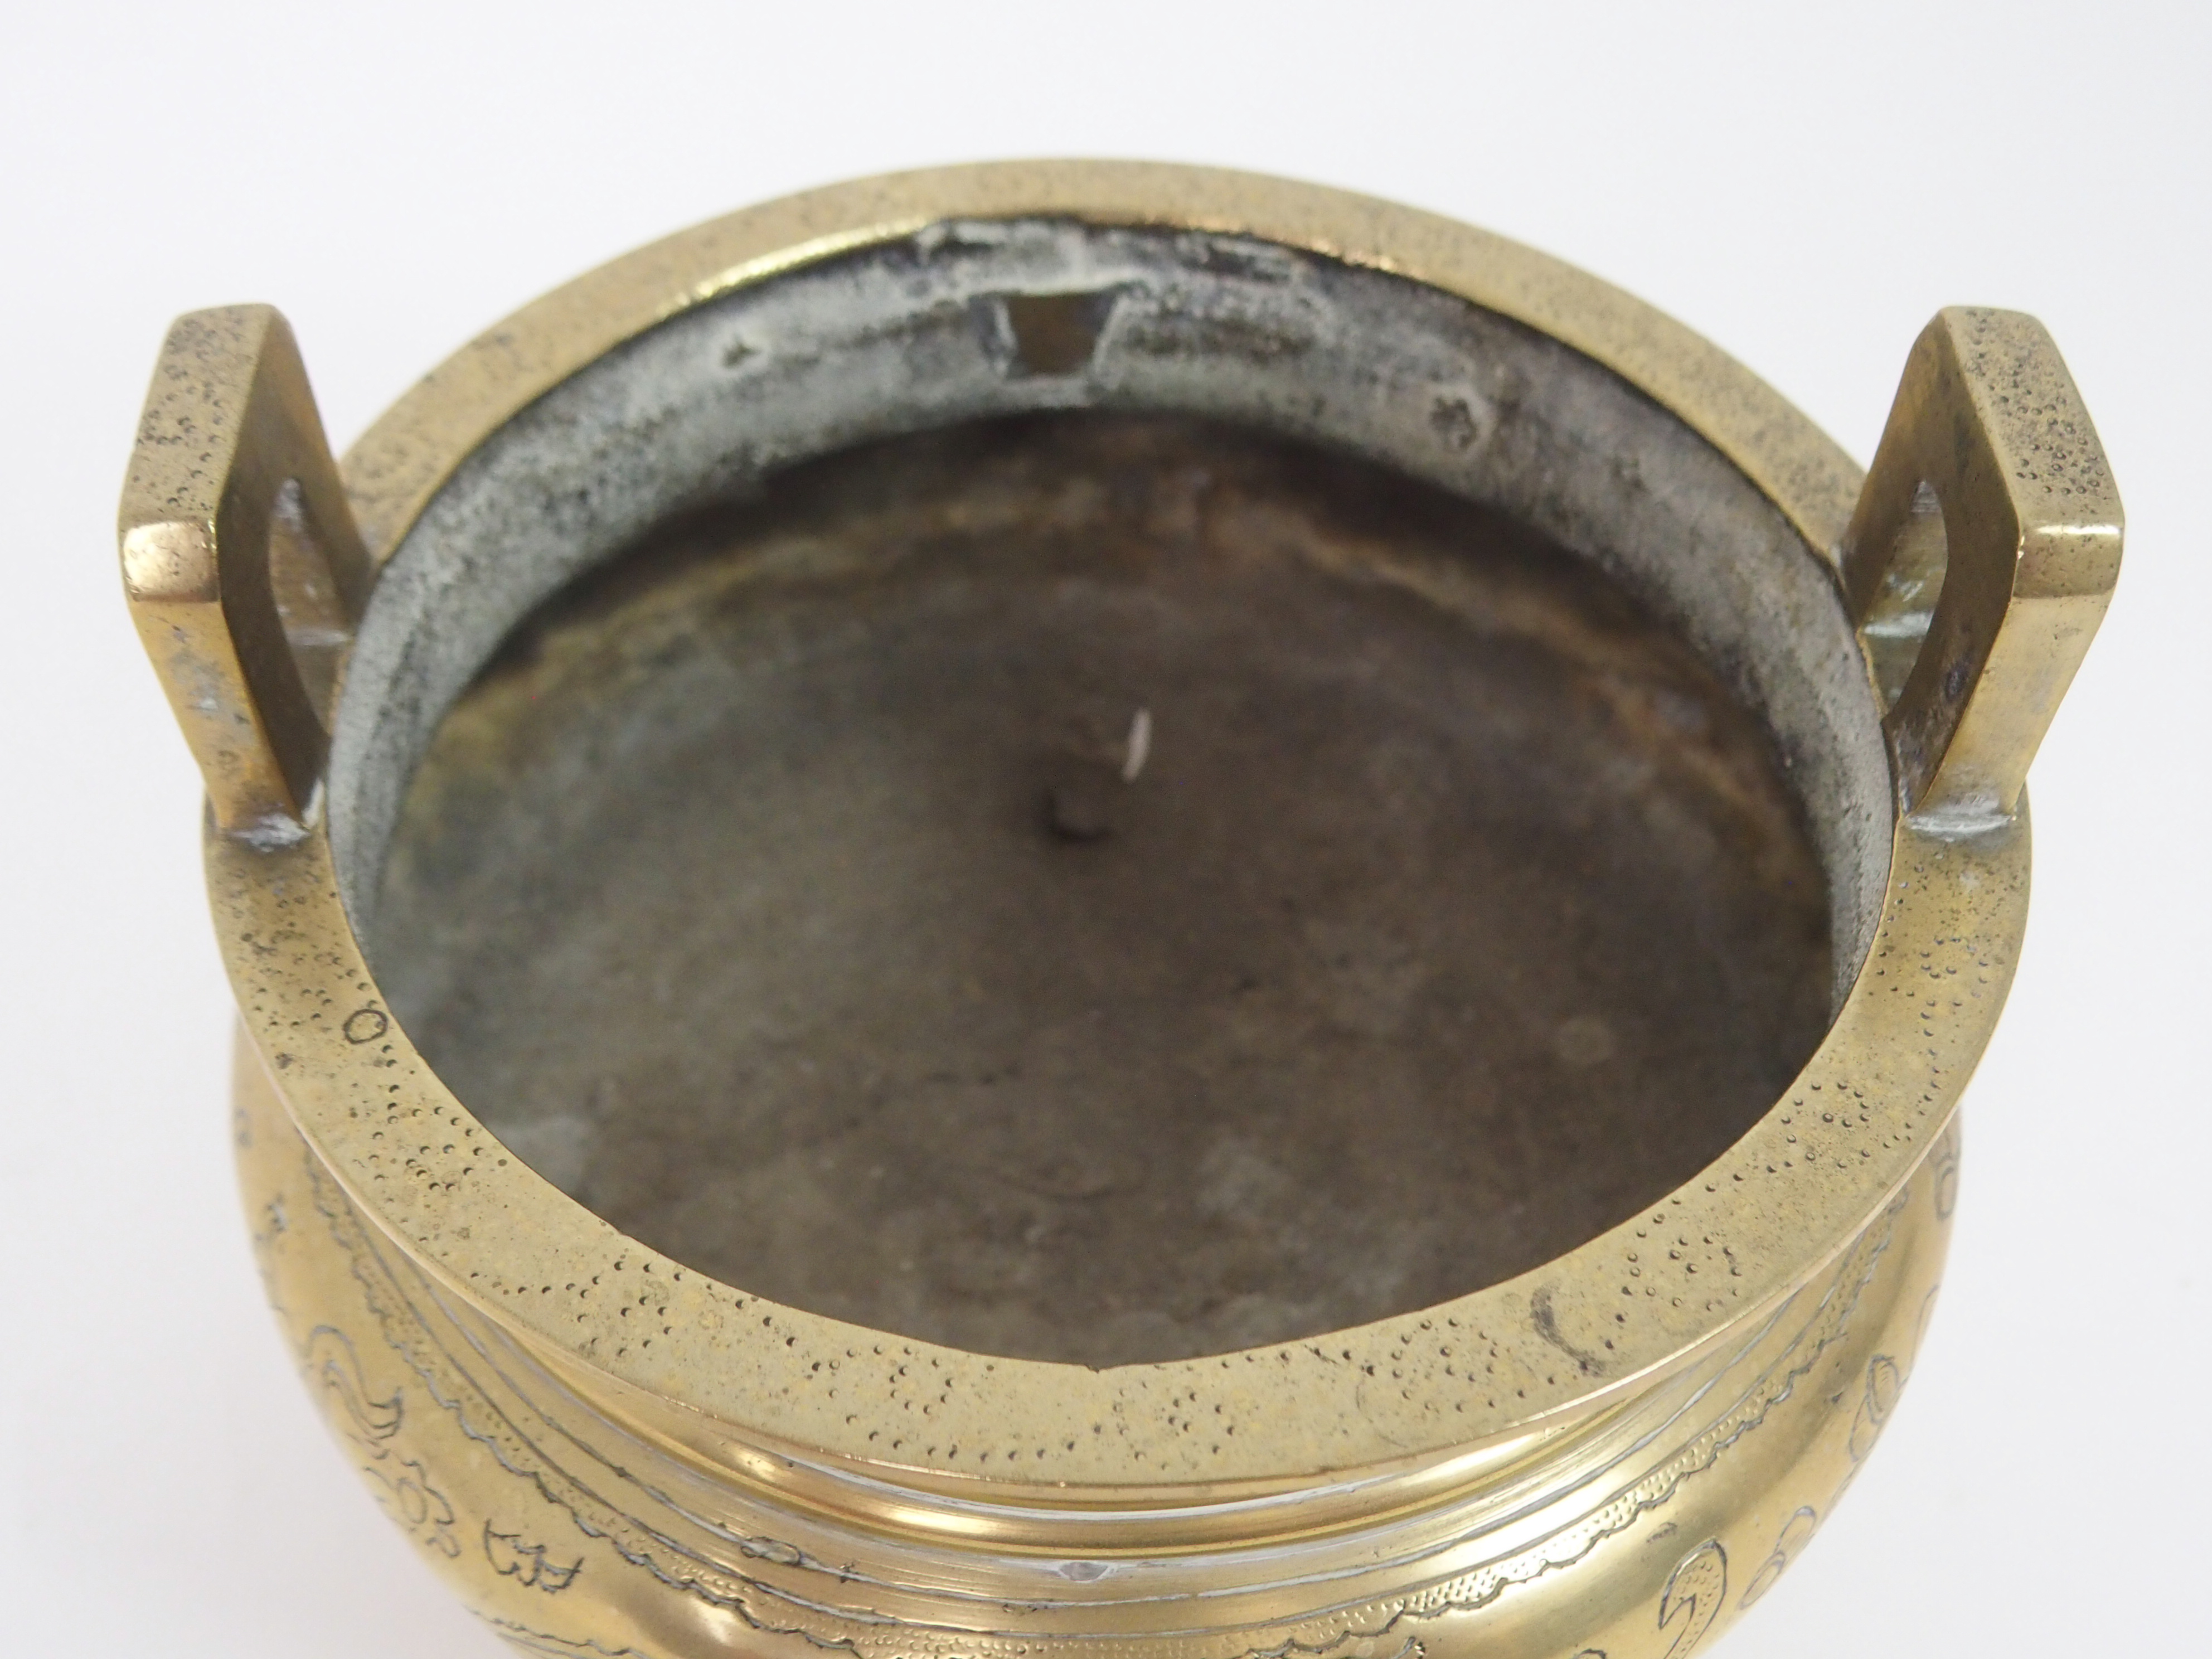 A CHINESE BRASS INCENSE BURNER with lug handles above a key pattern band and decorated with precious - Image 4 of 6